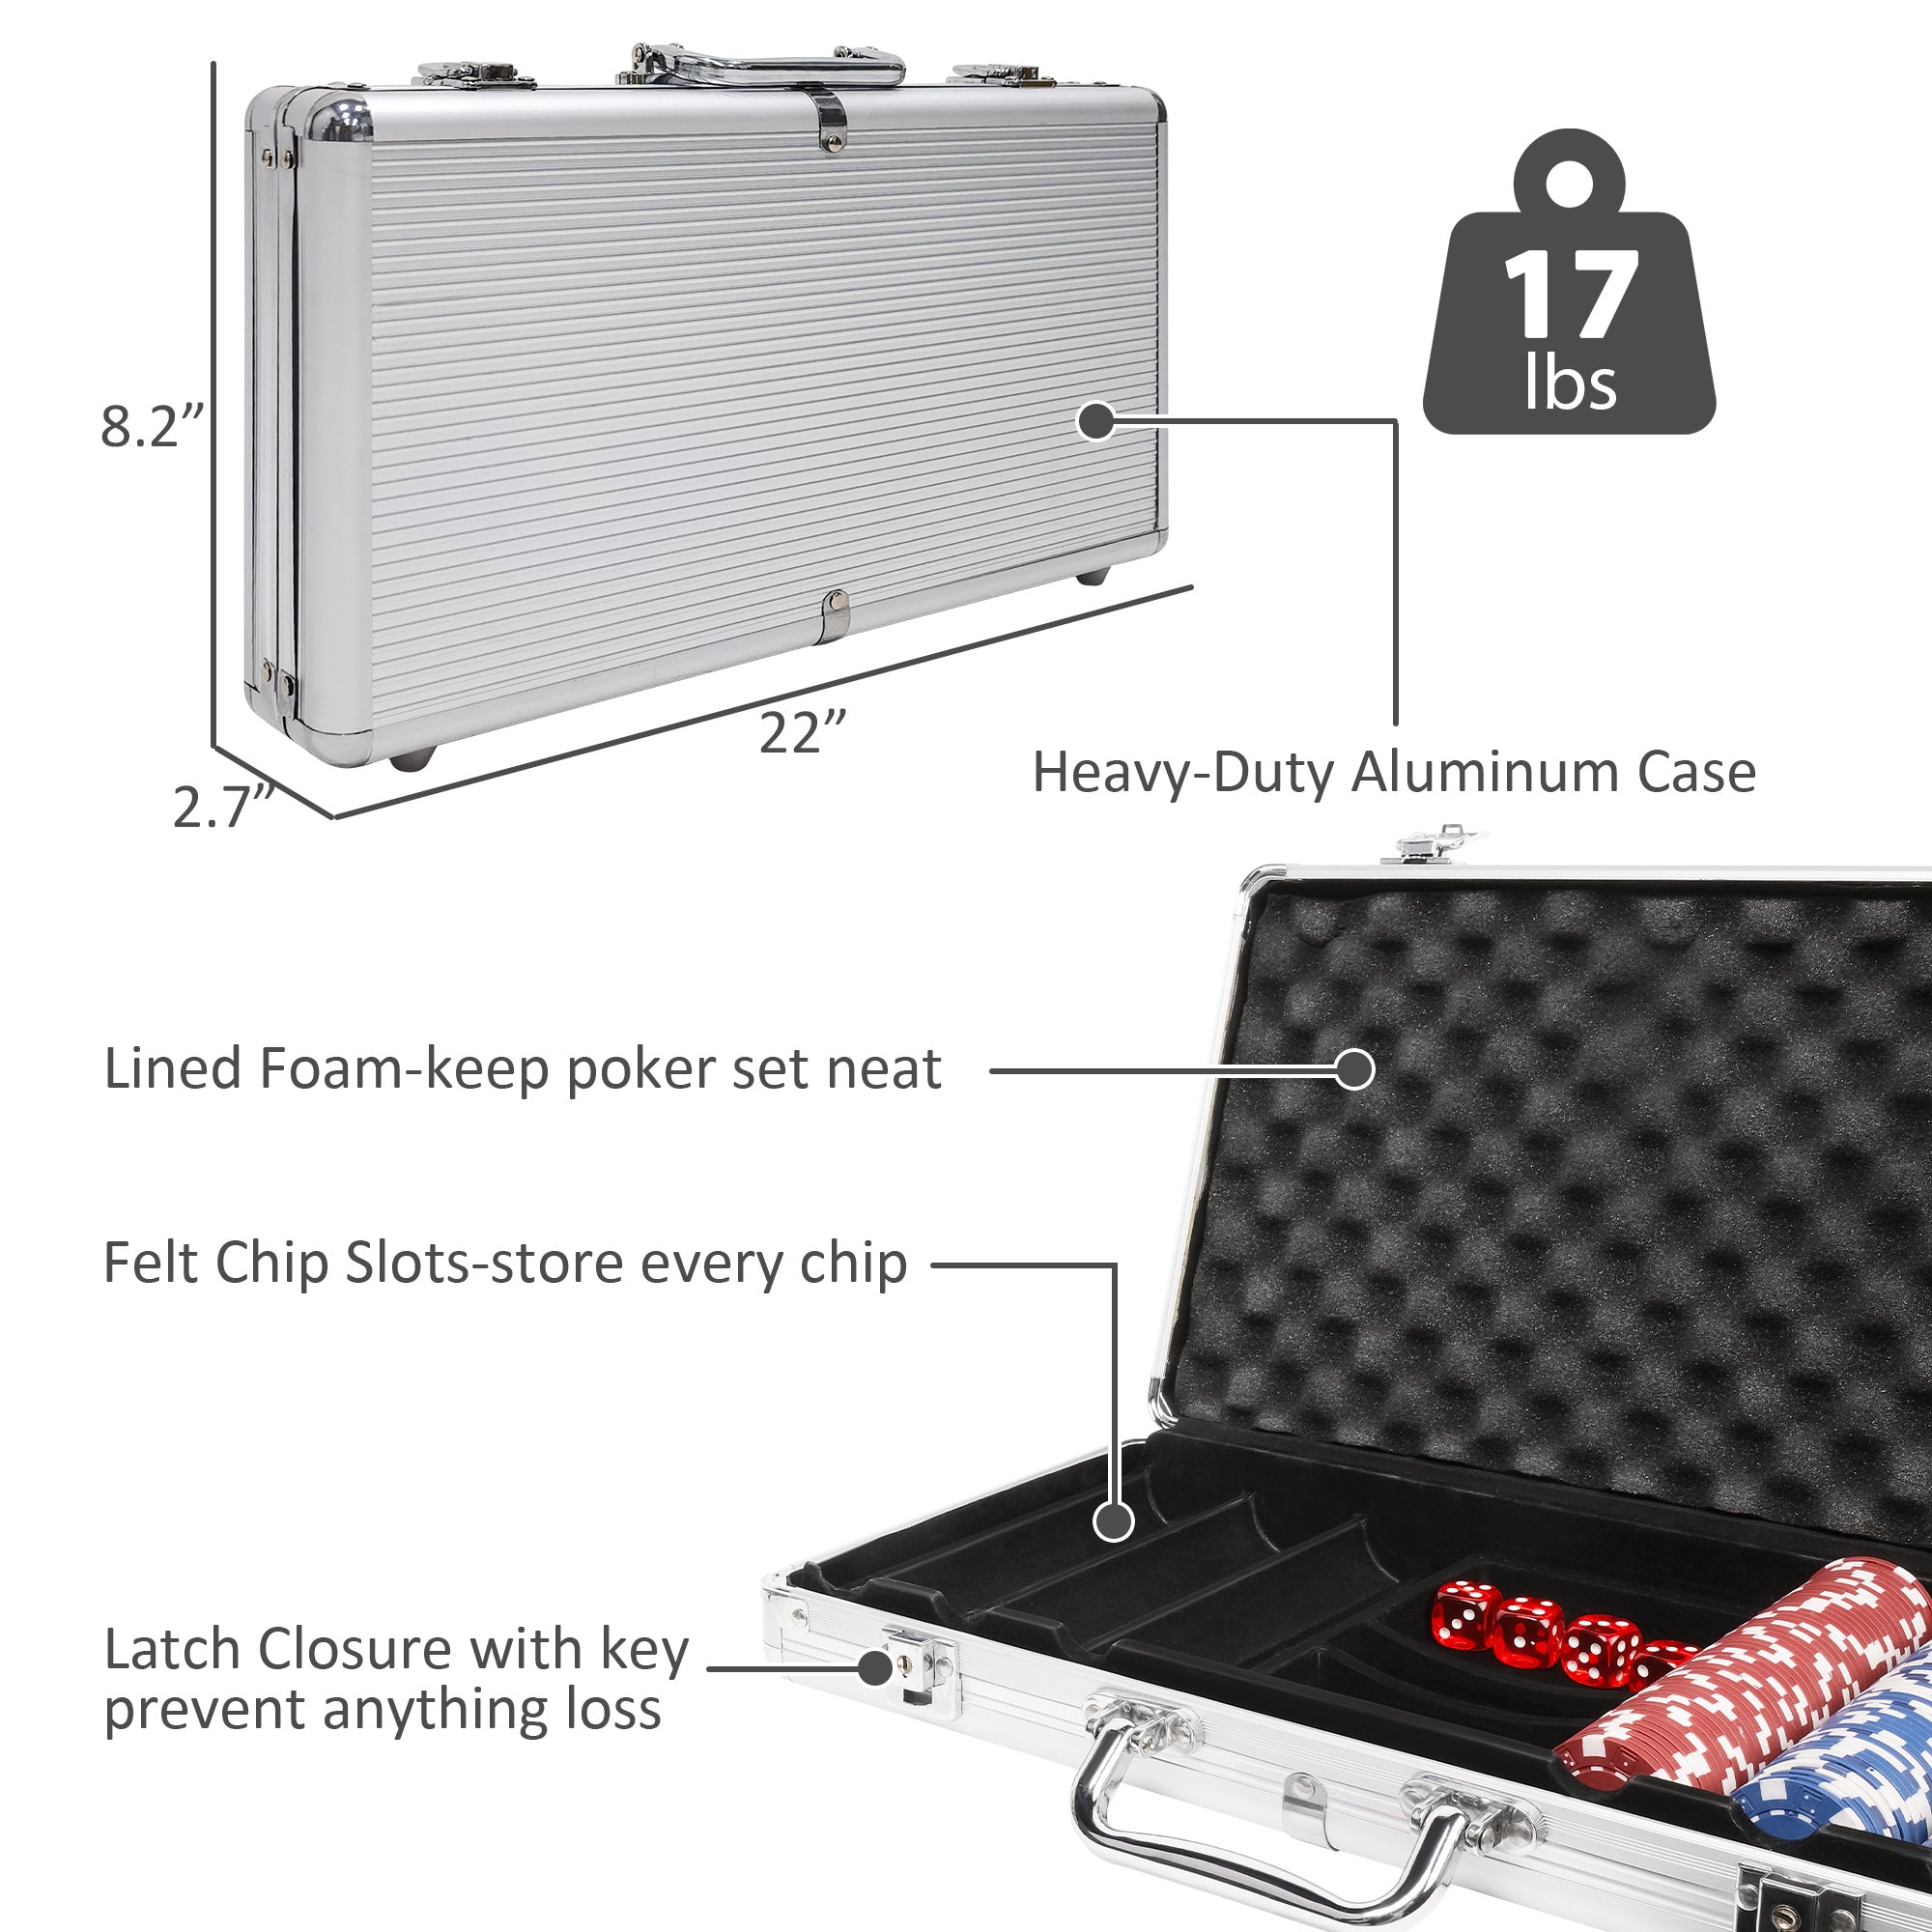 300pc 11.5g Poker Chip Set for Texas Holdem with Aluminum Case Clay Poker Chips Set